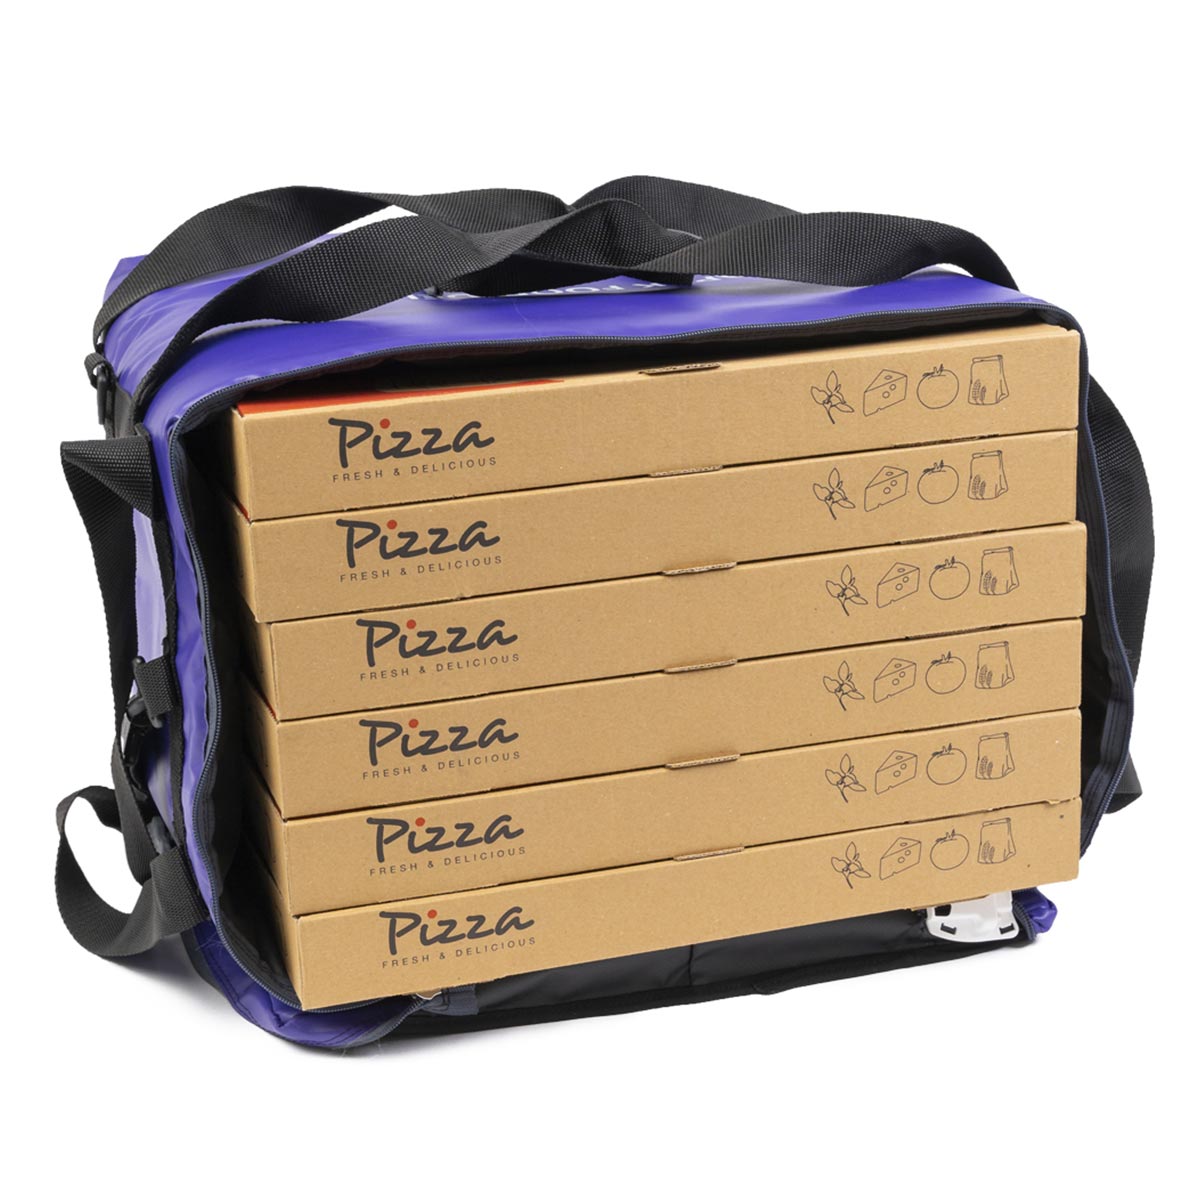 Versapak pizza delivery bag in use example